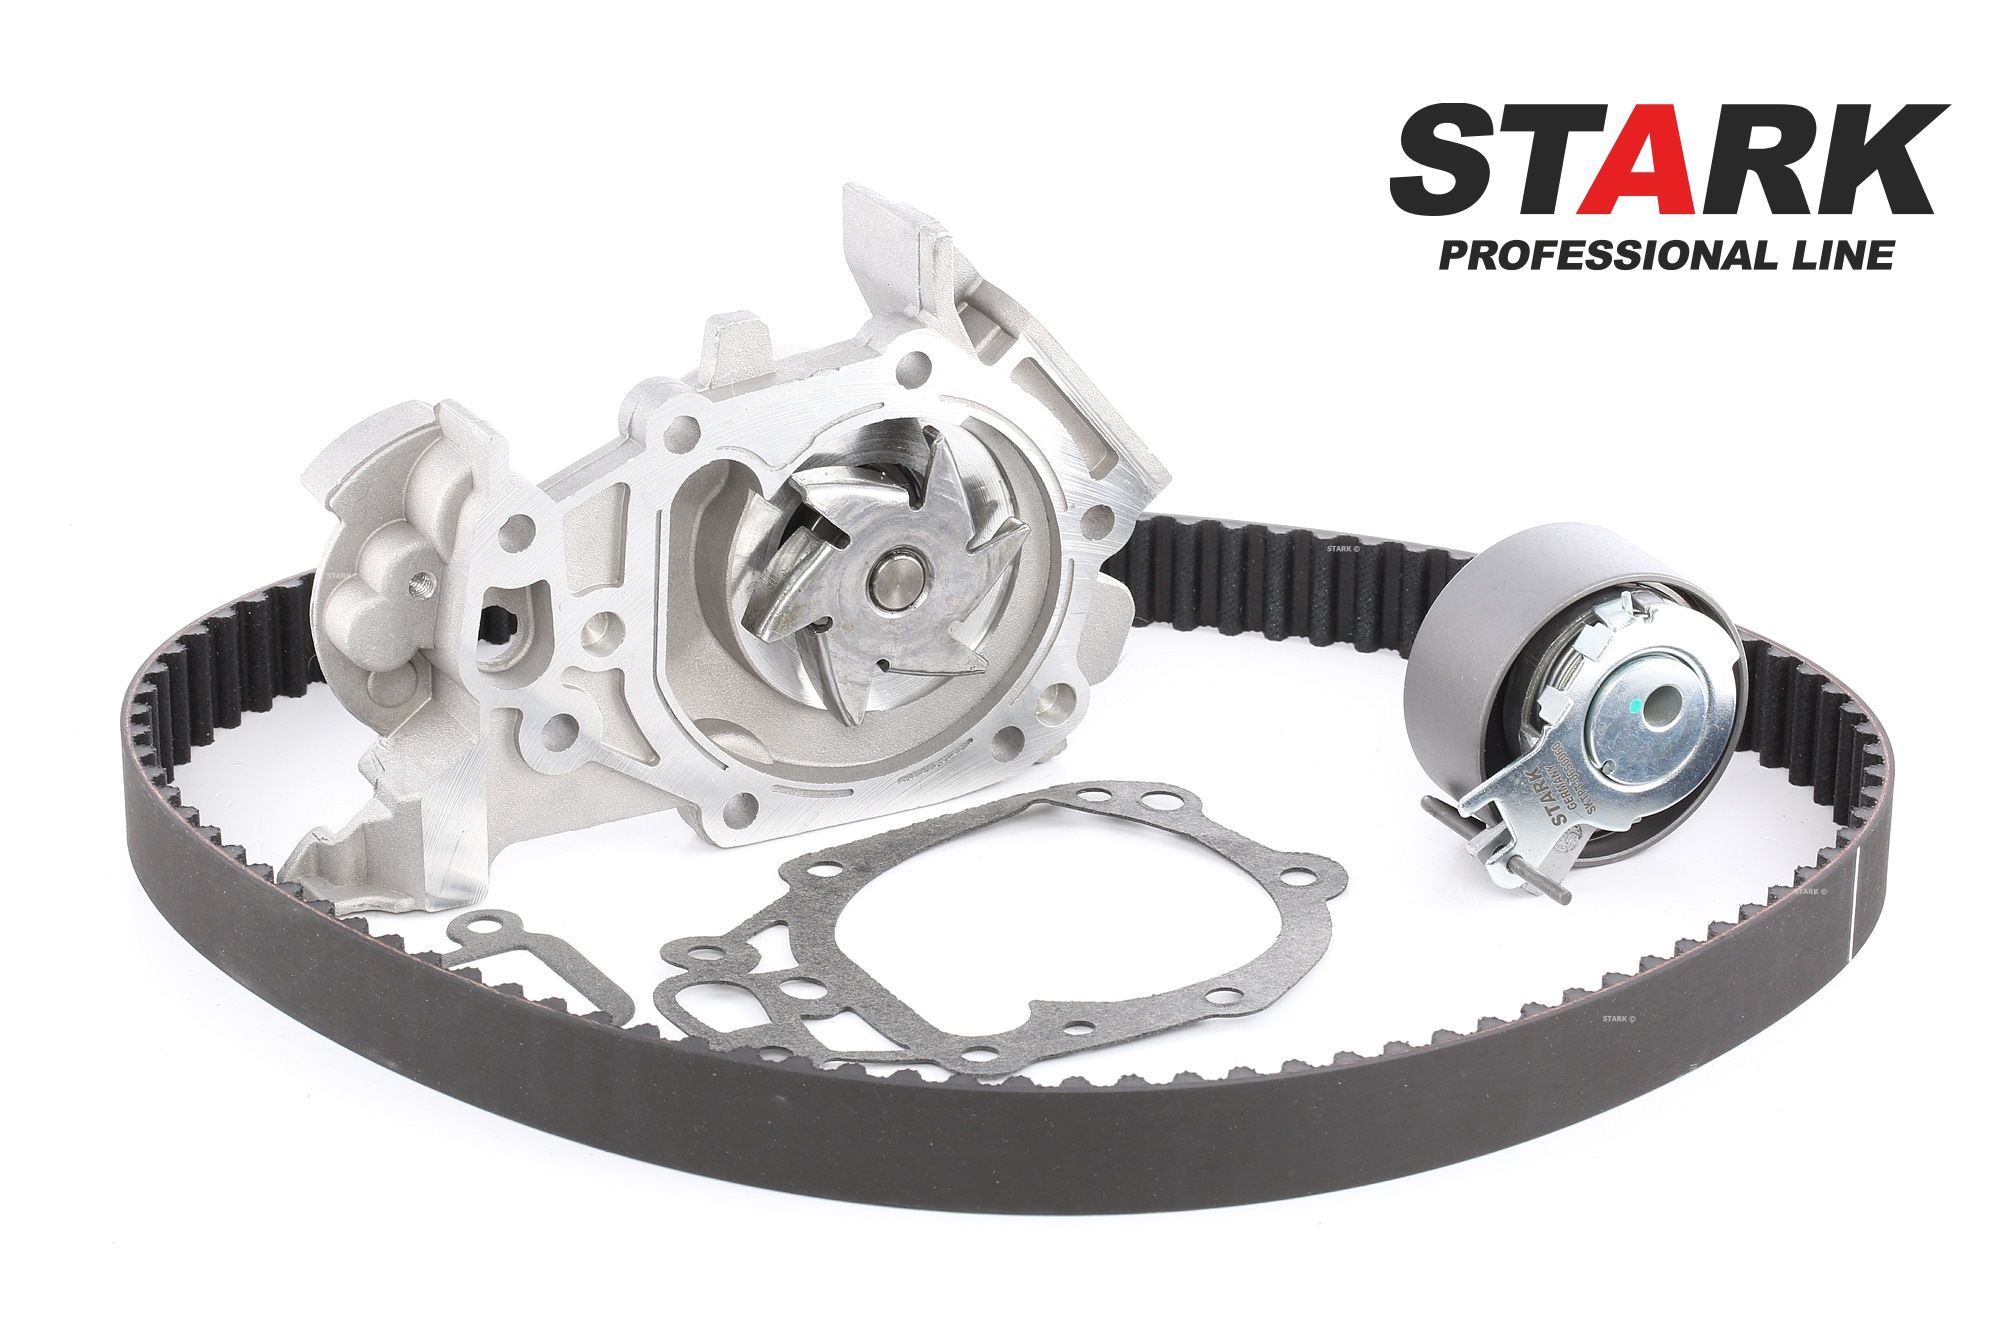 STARK SKWPT-0750032 Water pump and timing belt kit with gaskets/seals, Number of Teeth: 95 L: 905 mm, with rounded tooth profile, Sheet Steel